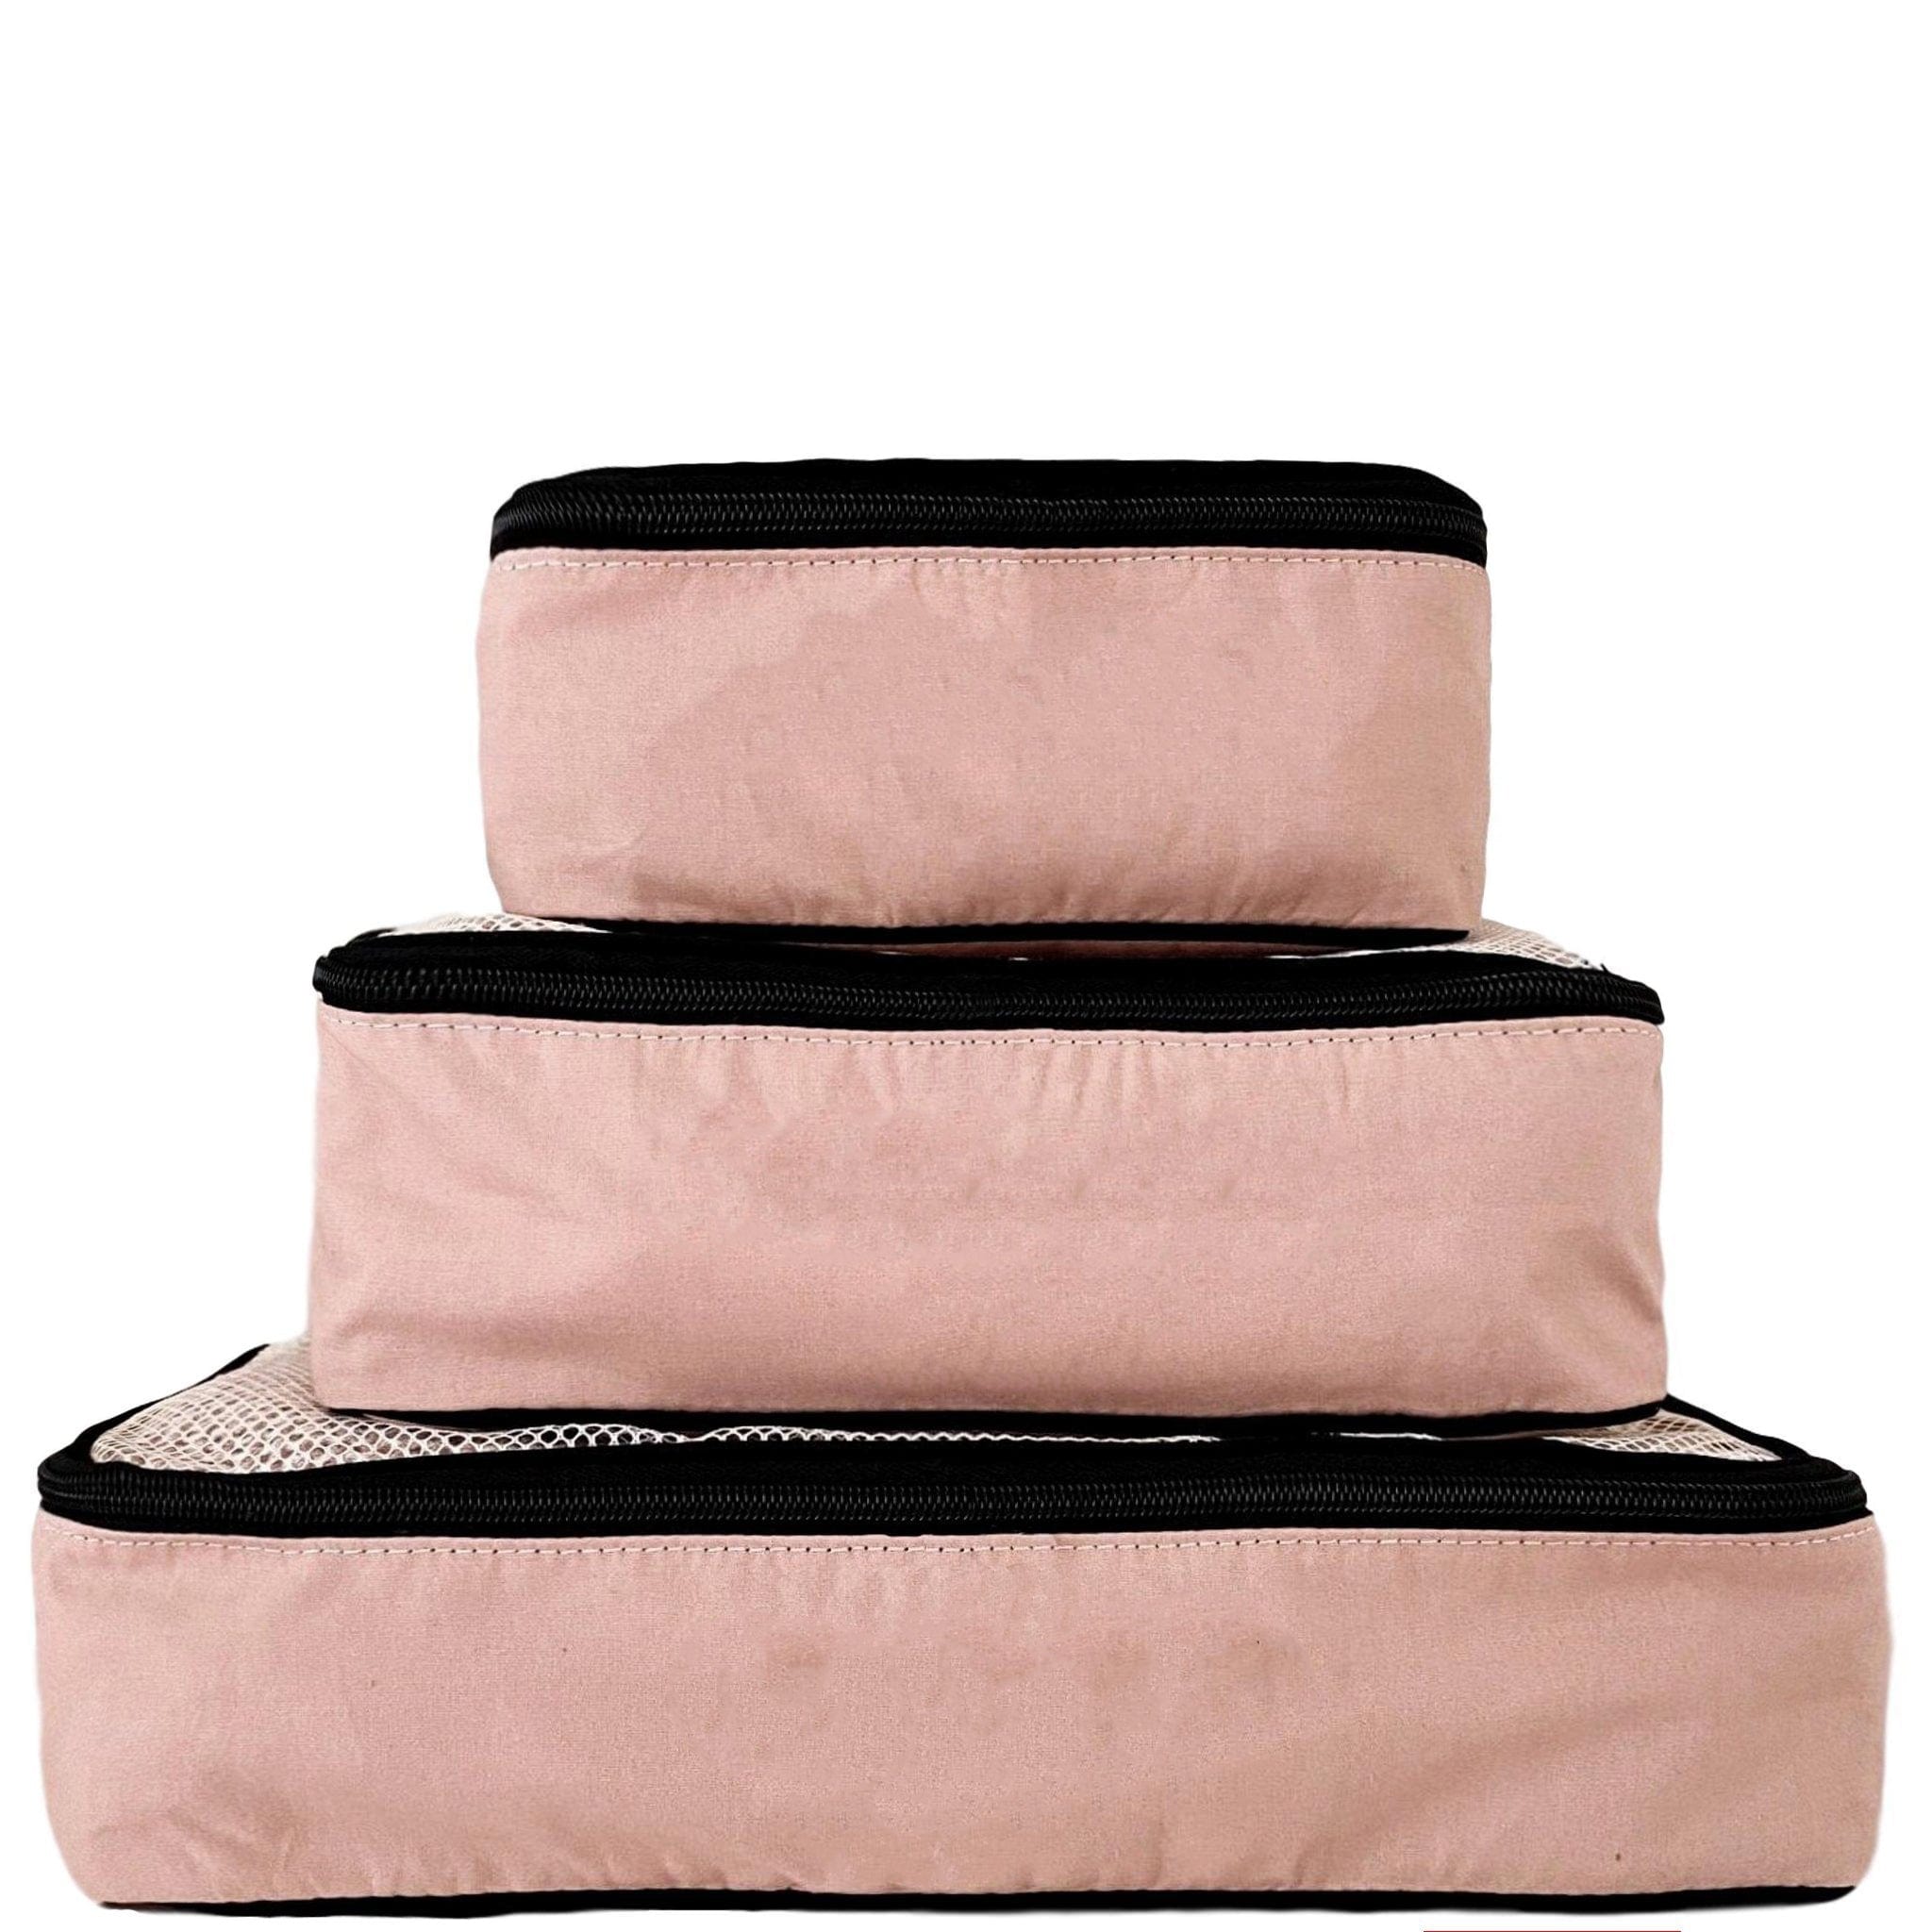 Cotton Packing Cubes Pink 3-pack - Bag-all